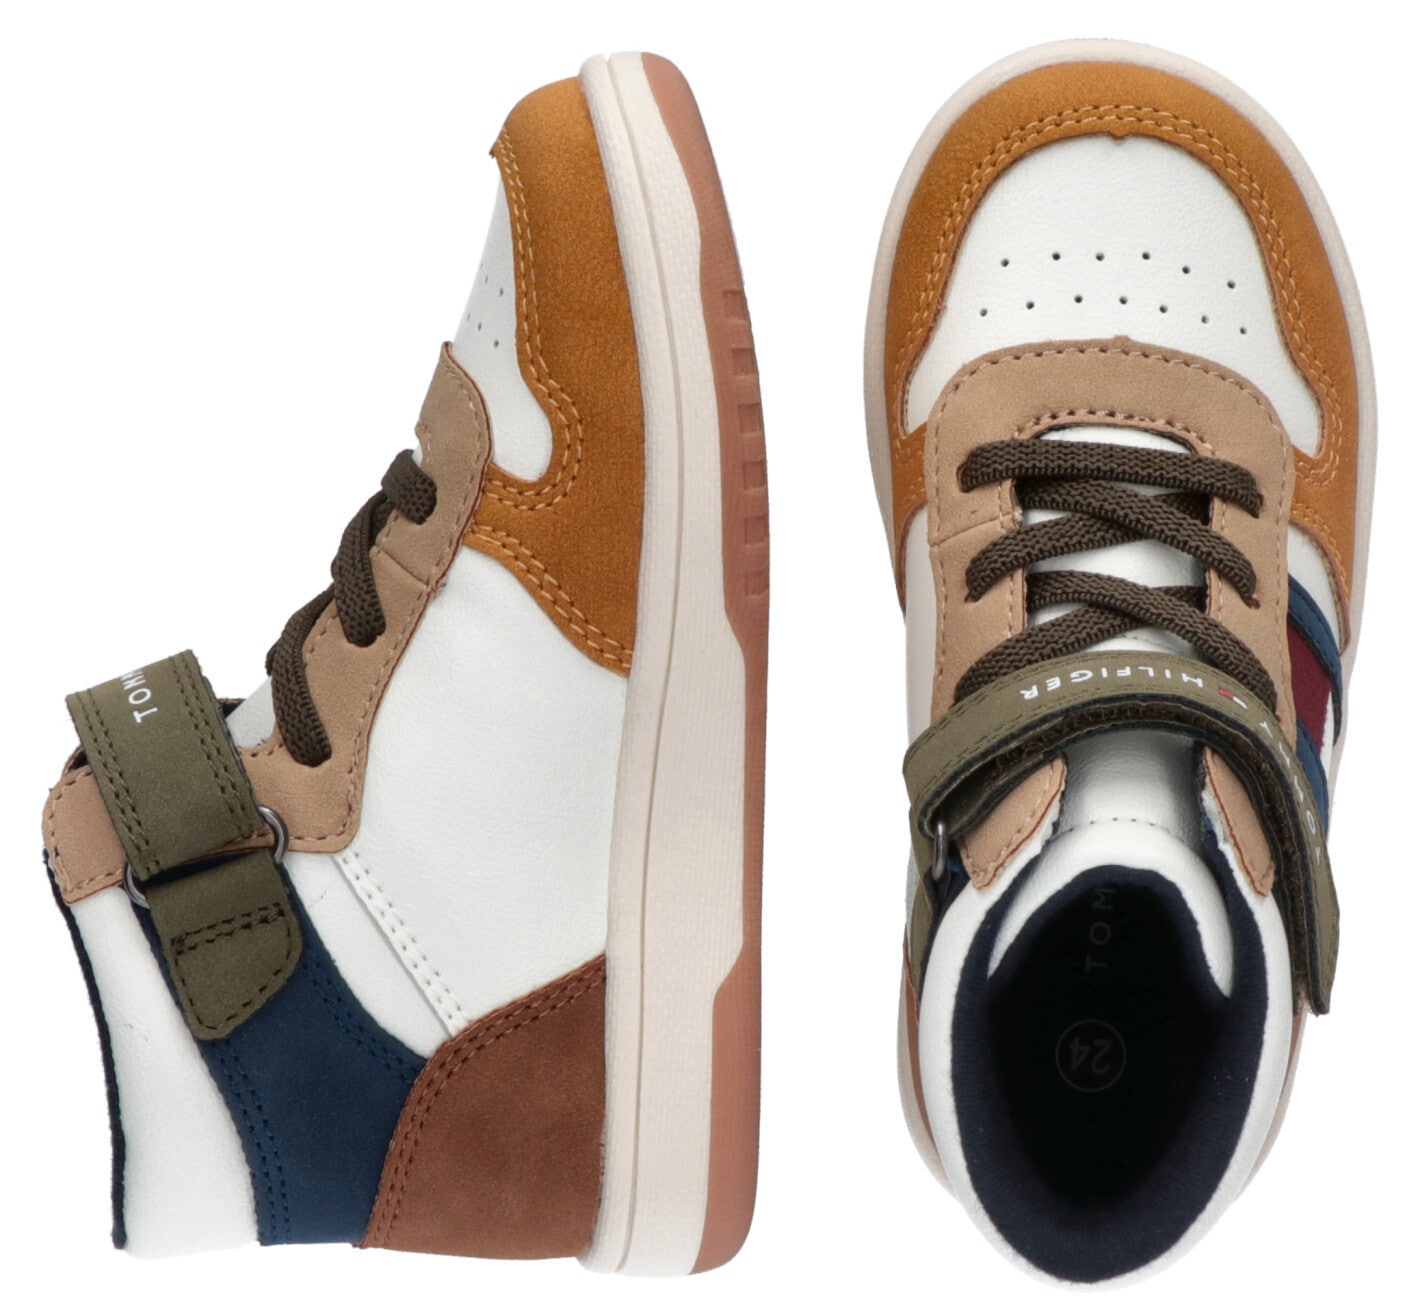 Hilfiger TOP SNEAKER«, im Look bei »FLAG HIGH LACE-UP/VELCRO modischen Tommy ♕ Sneaker colorblocking